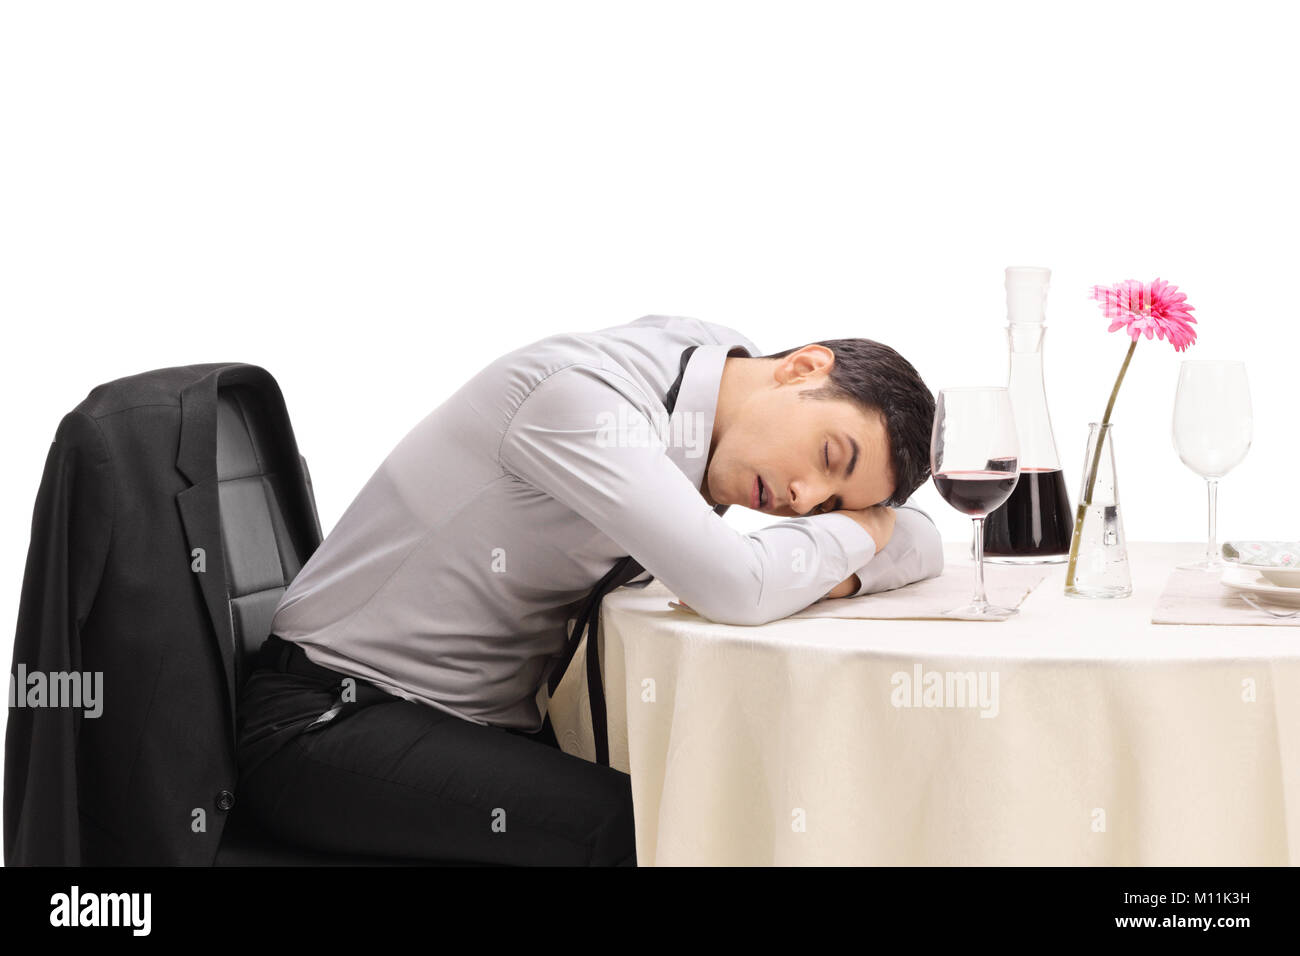 Drunk man sleeping on a restaurant table isolated on white background Stock Photo